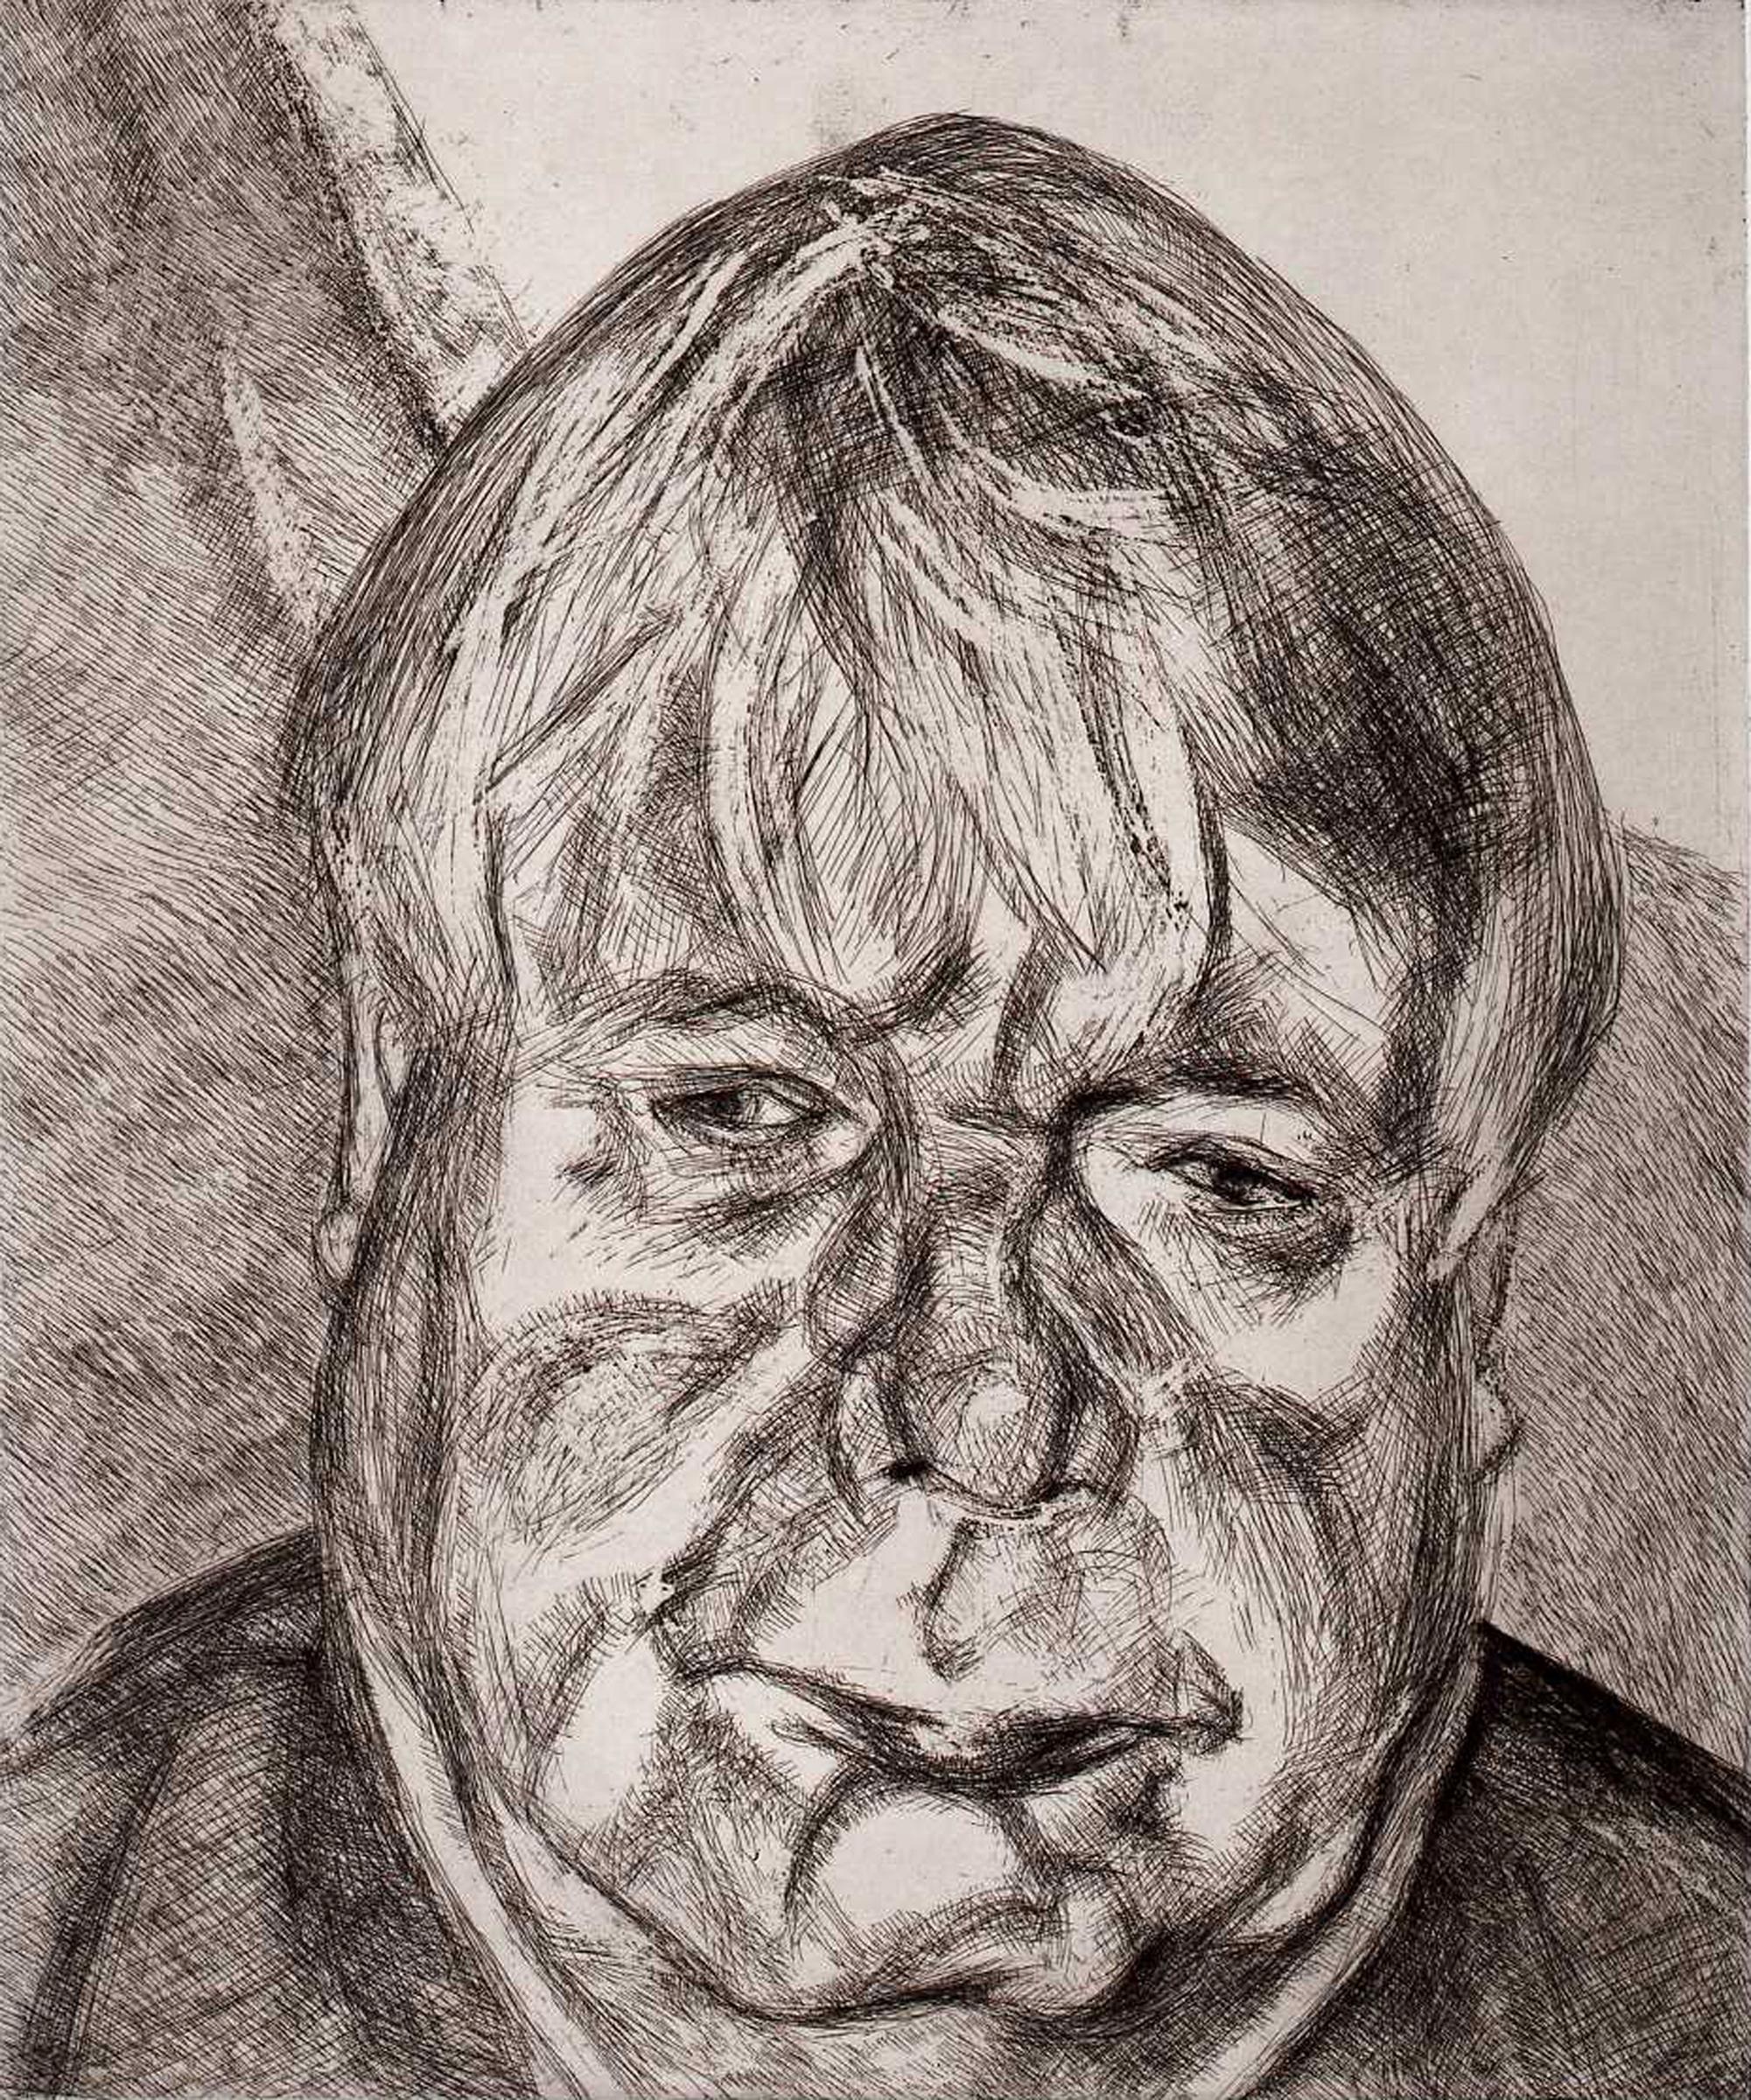 Donegal Man - Print by Lucian Freud